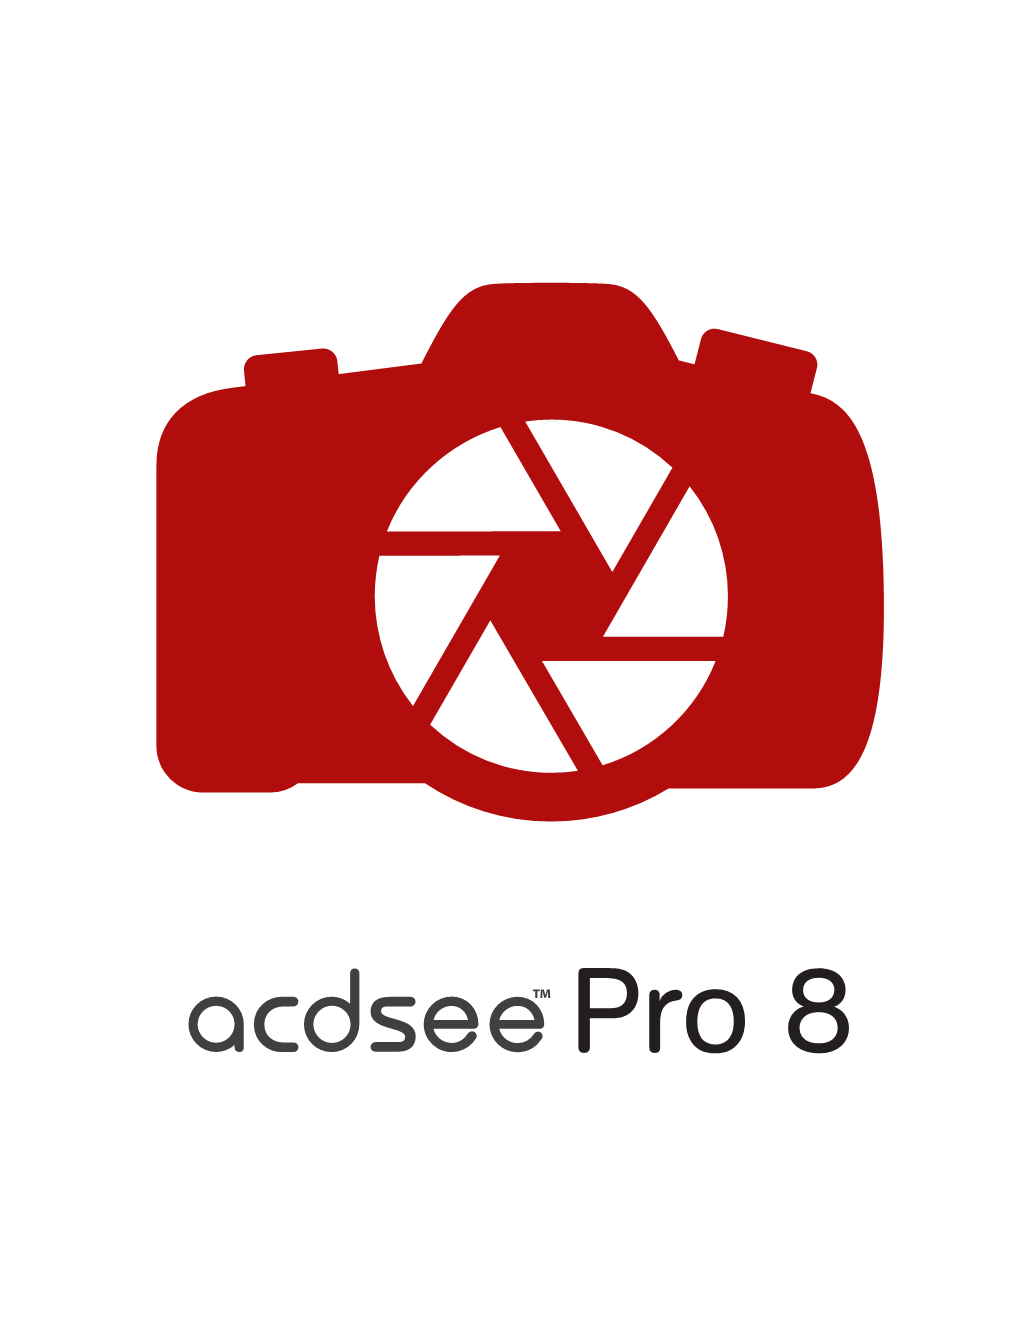 Download the Acdsee Pro 8 User Guide